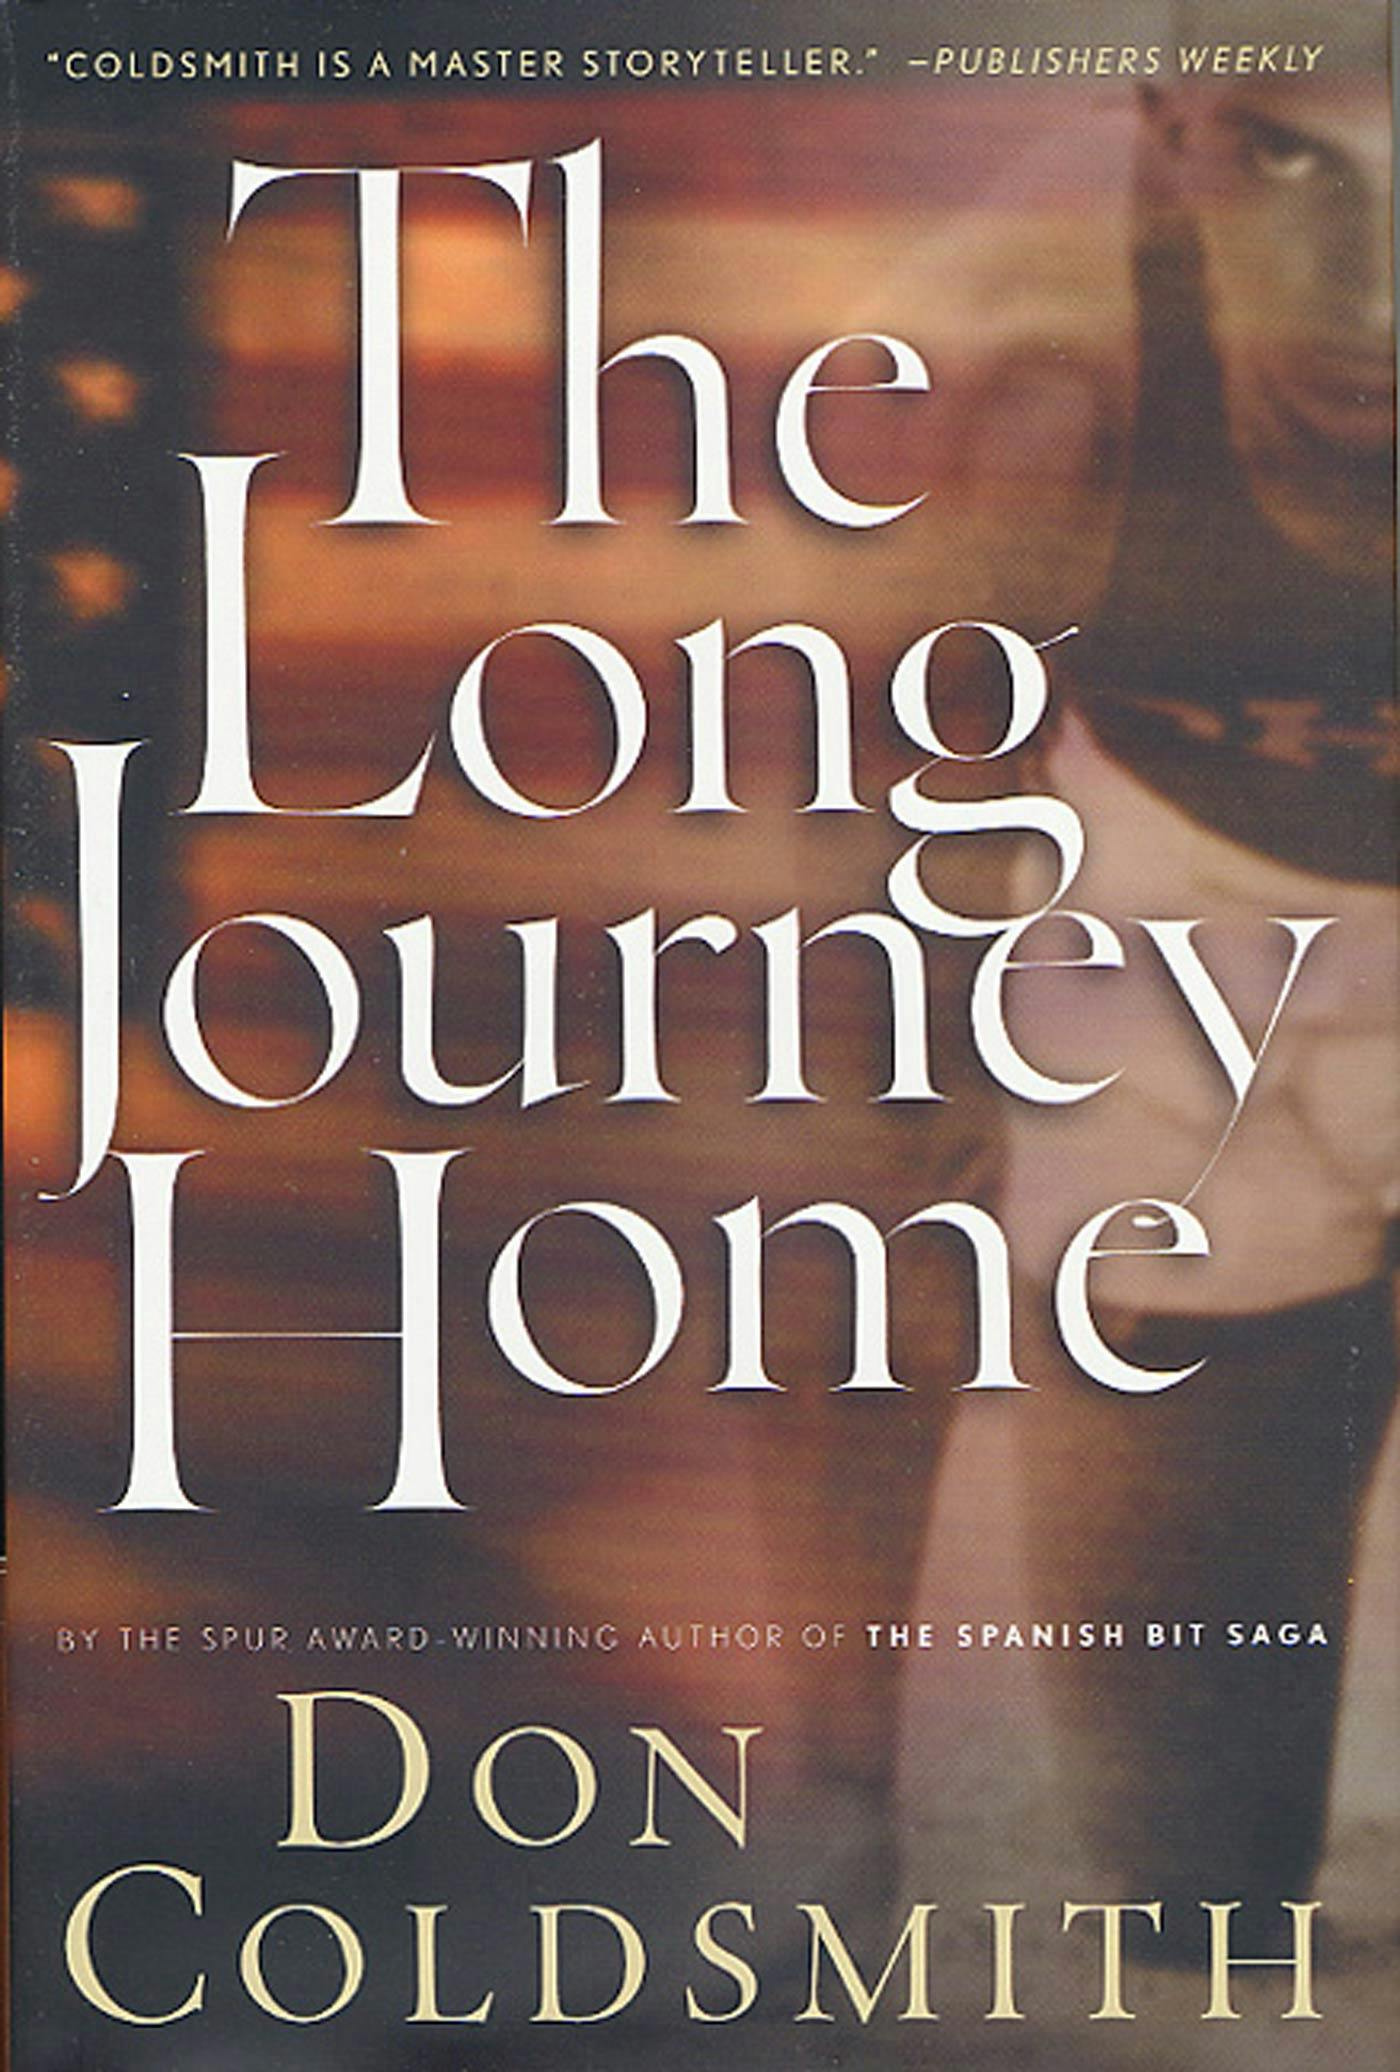 Cover for the book titled as: The Long Journey Home